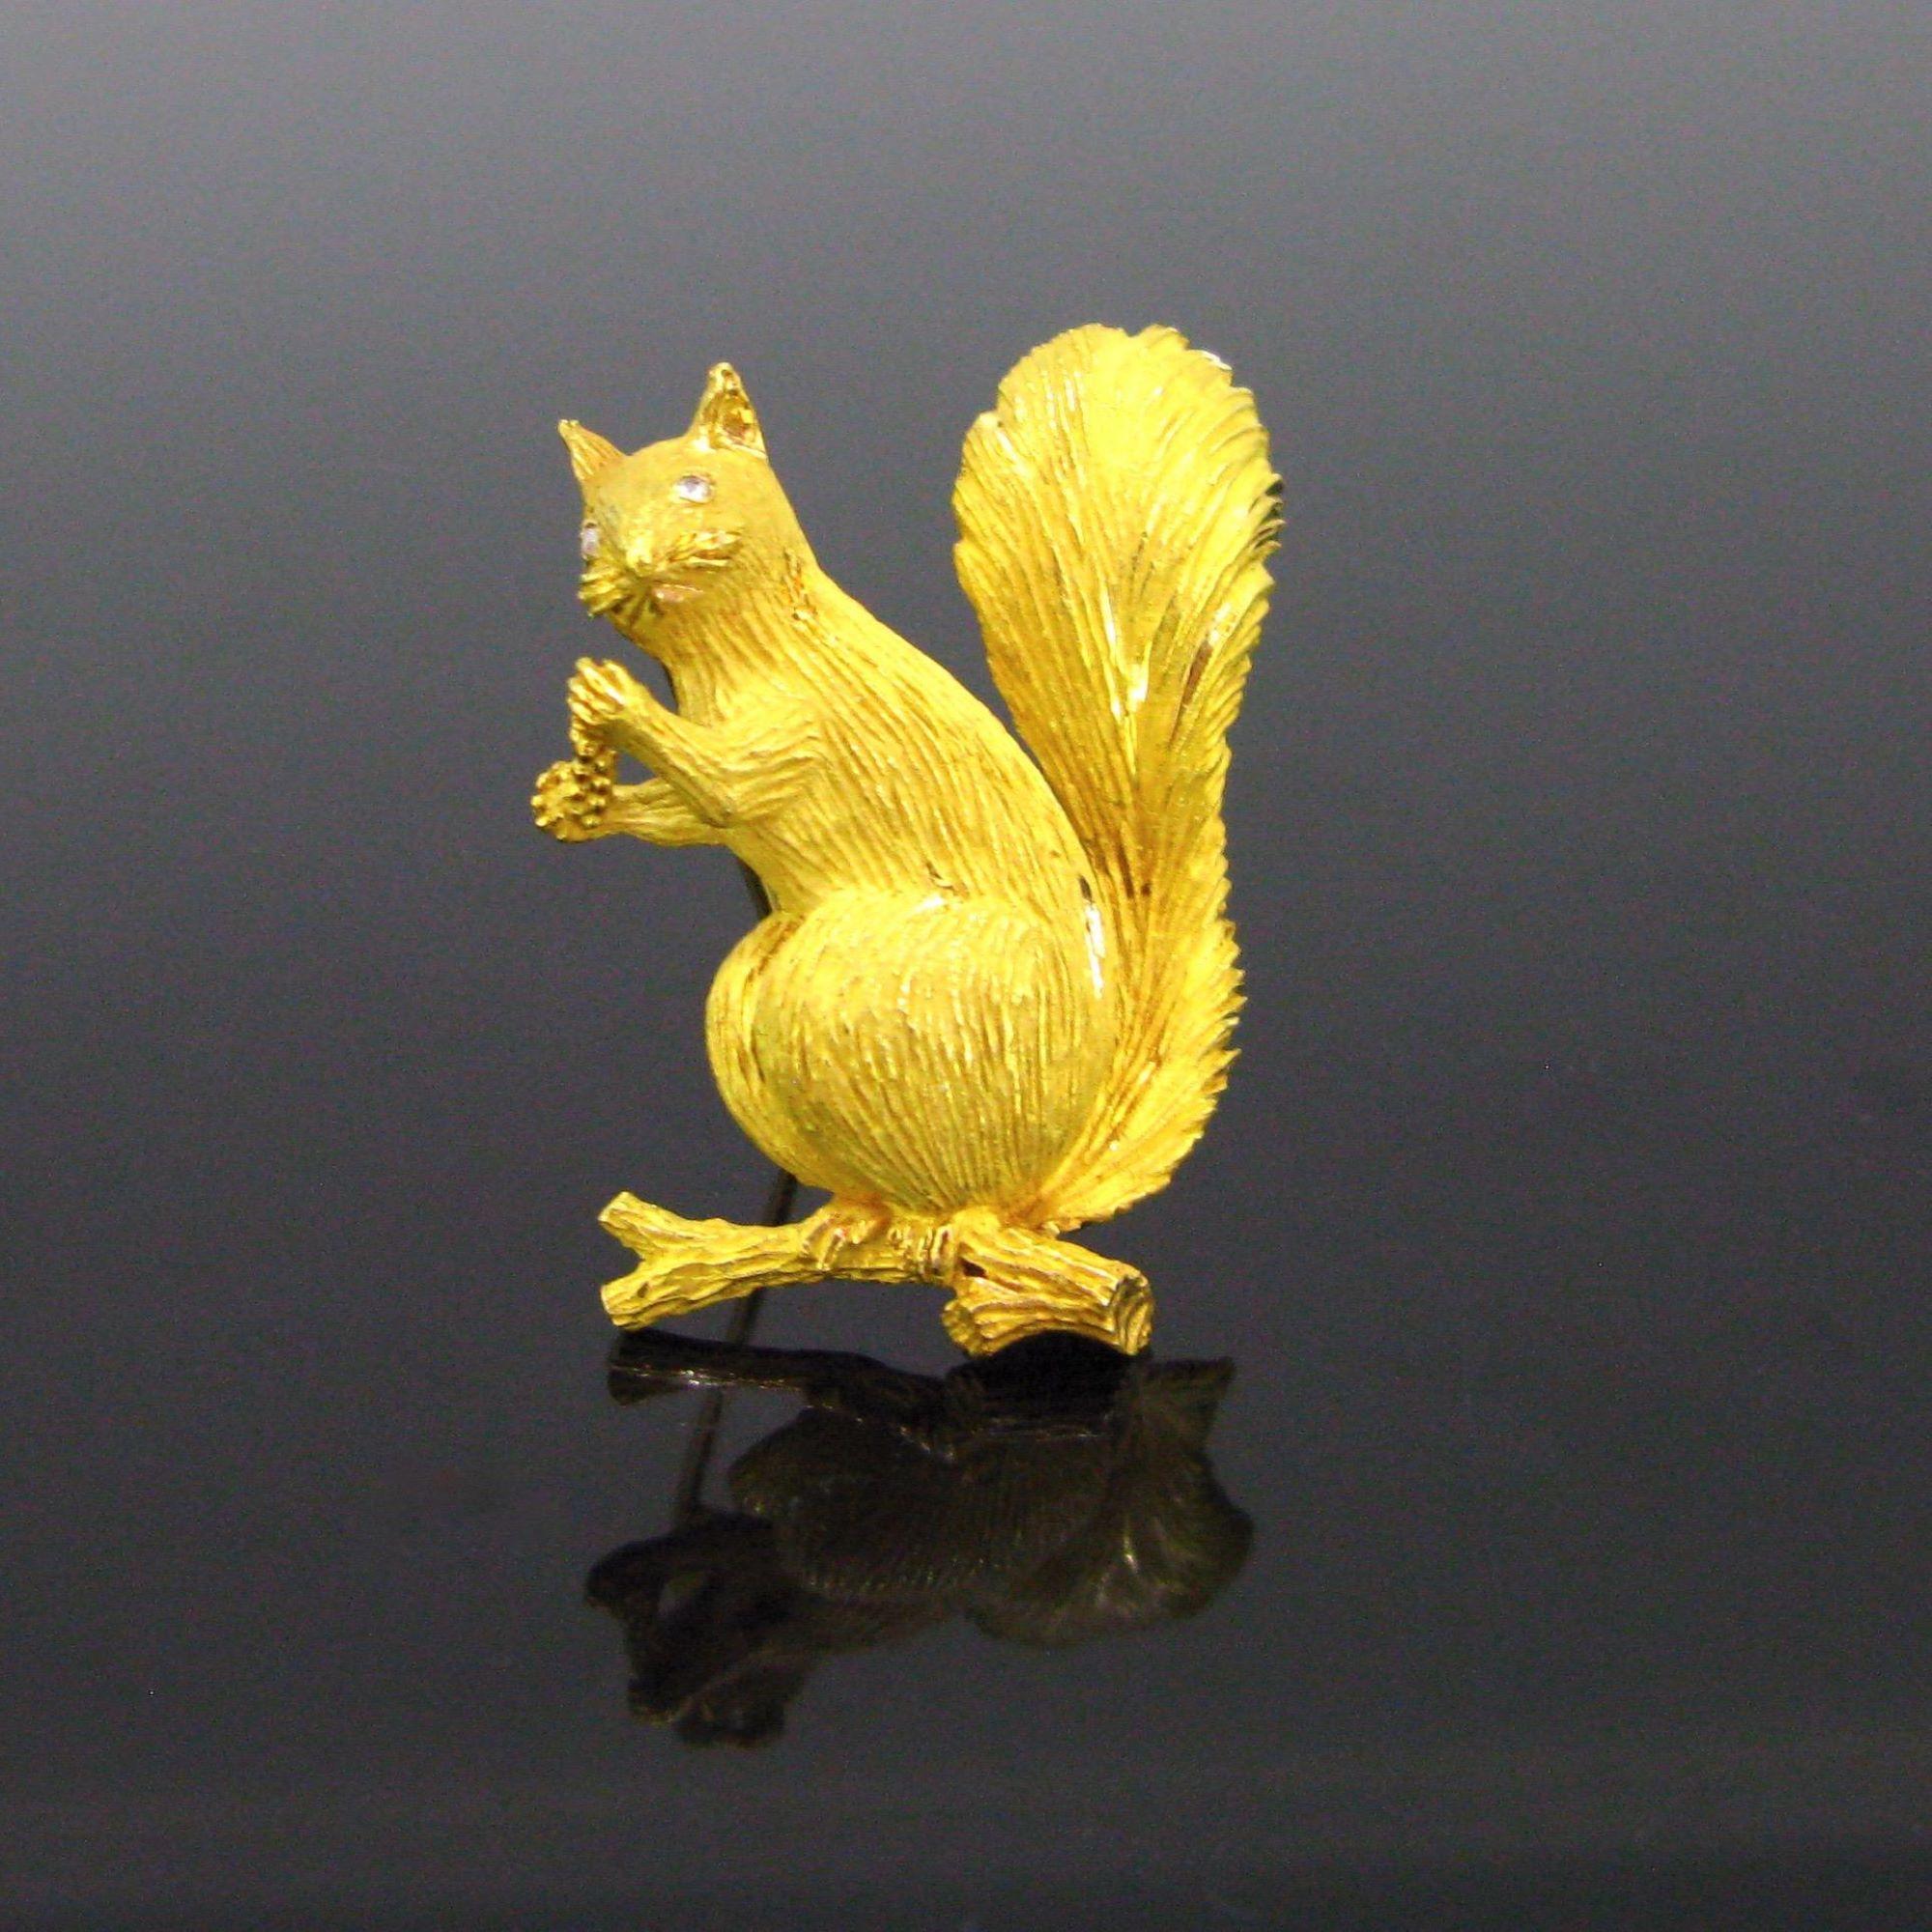 Weight:	11.51gr


Metal:		18kt yellow gold 


Stones:	2 rose cut diamonds


Condition:	Very Good


Comments:	This adorable squirrel on a branch is fully made in 18kt solid gold (tested). His eyes are adorned with rose cut diamonds. He is carrying a